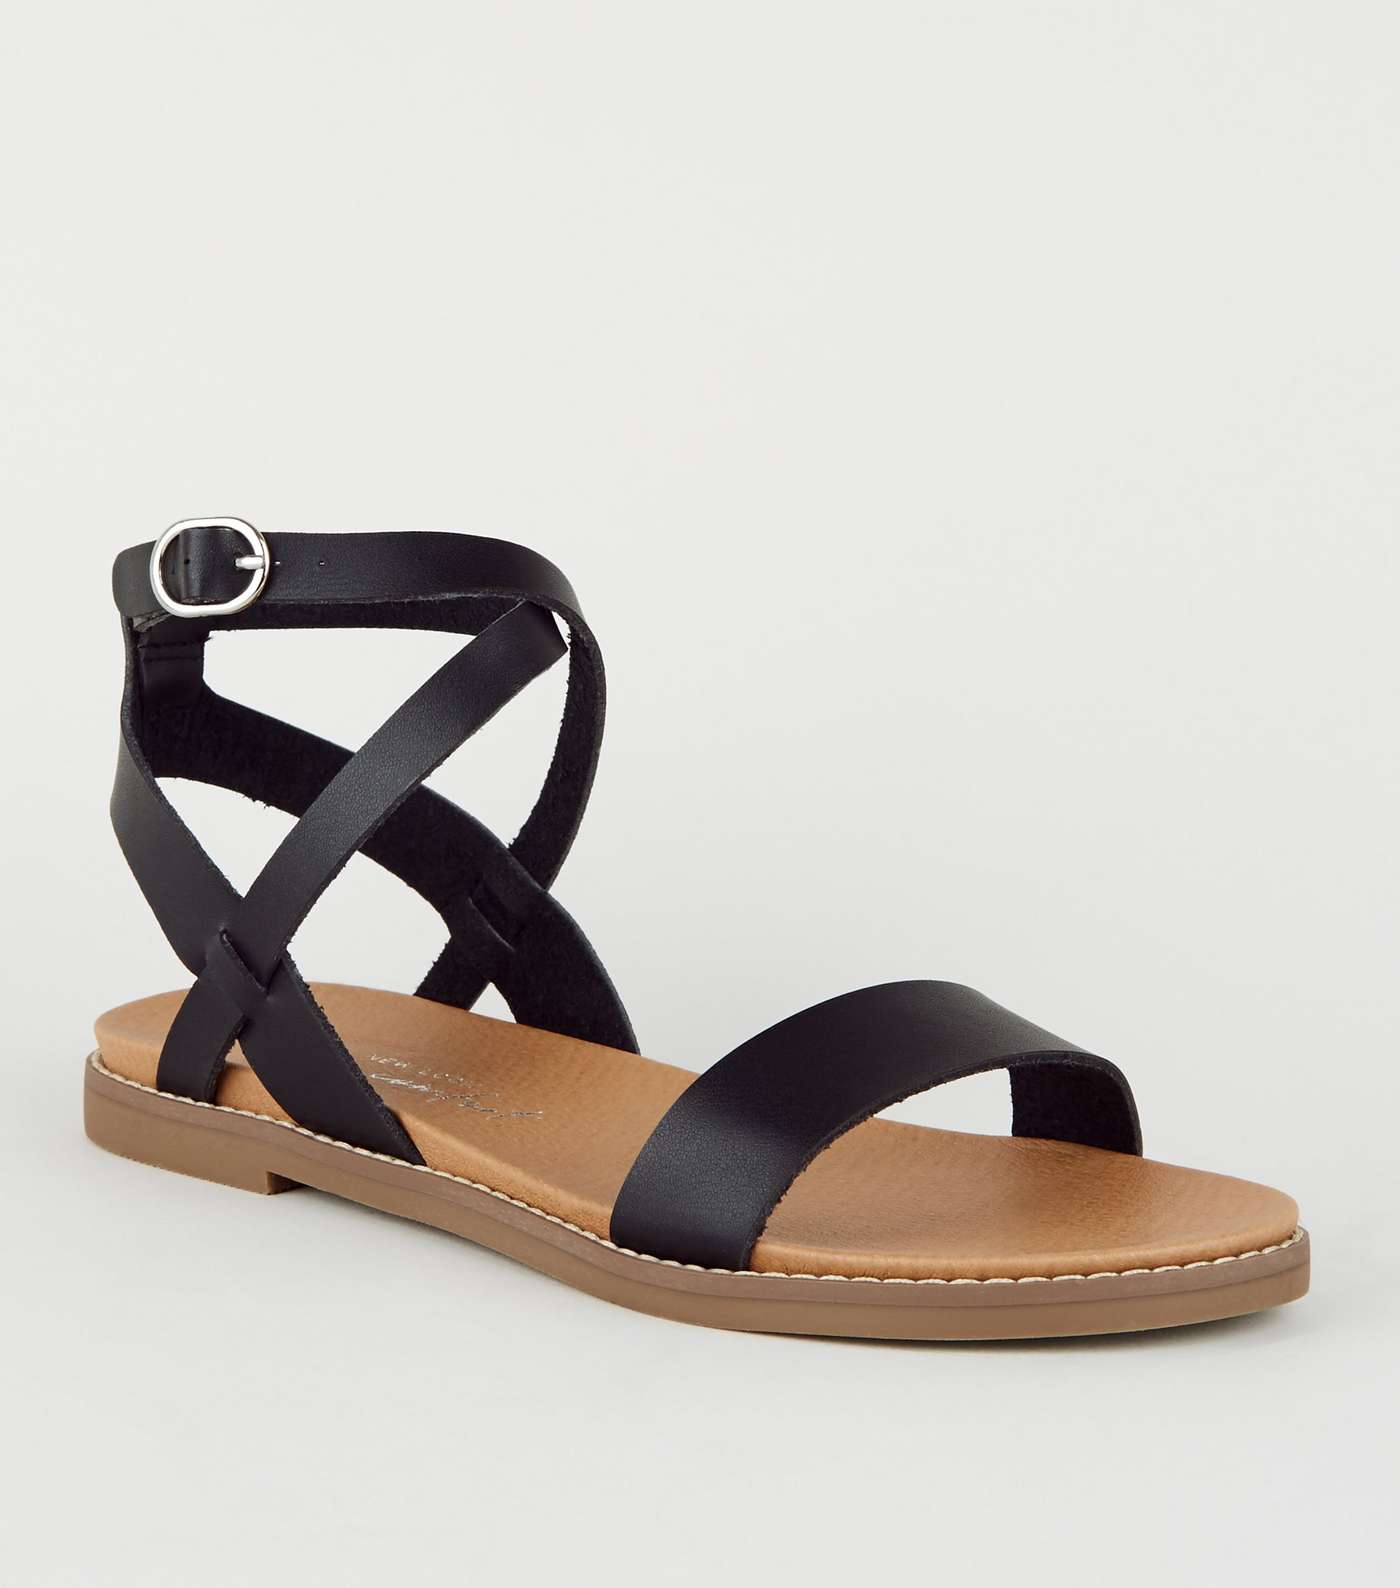 Black Leather-Look Cross Strap Footbed Sandals